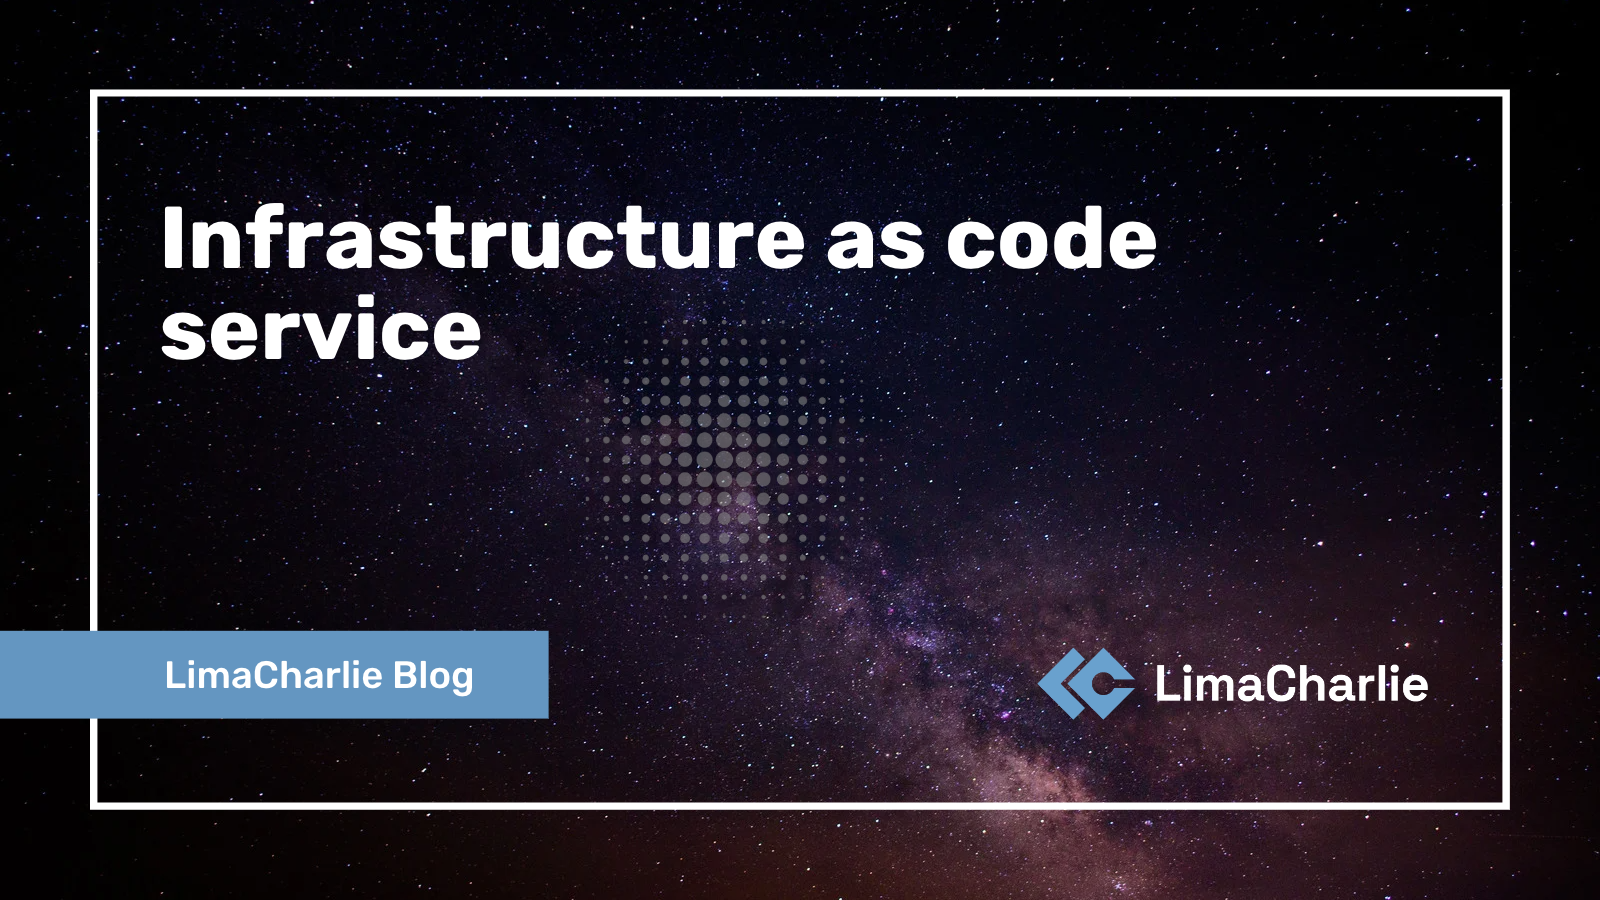 Infrastructure as code service